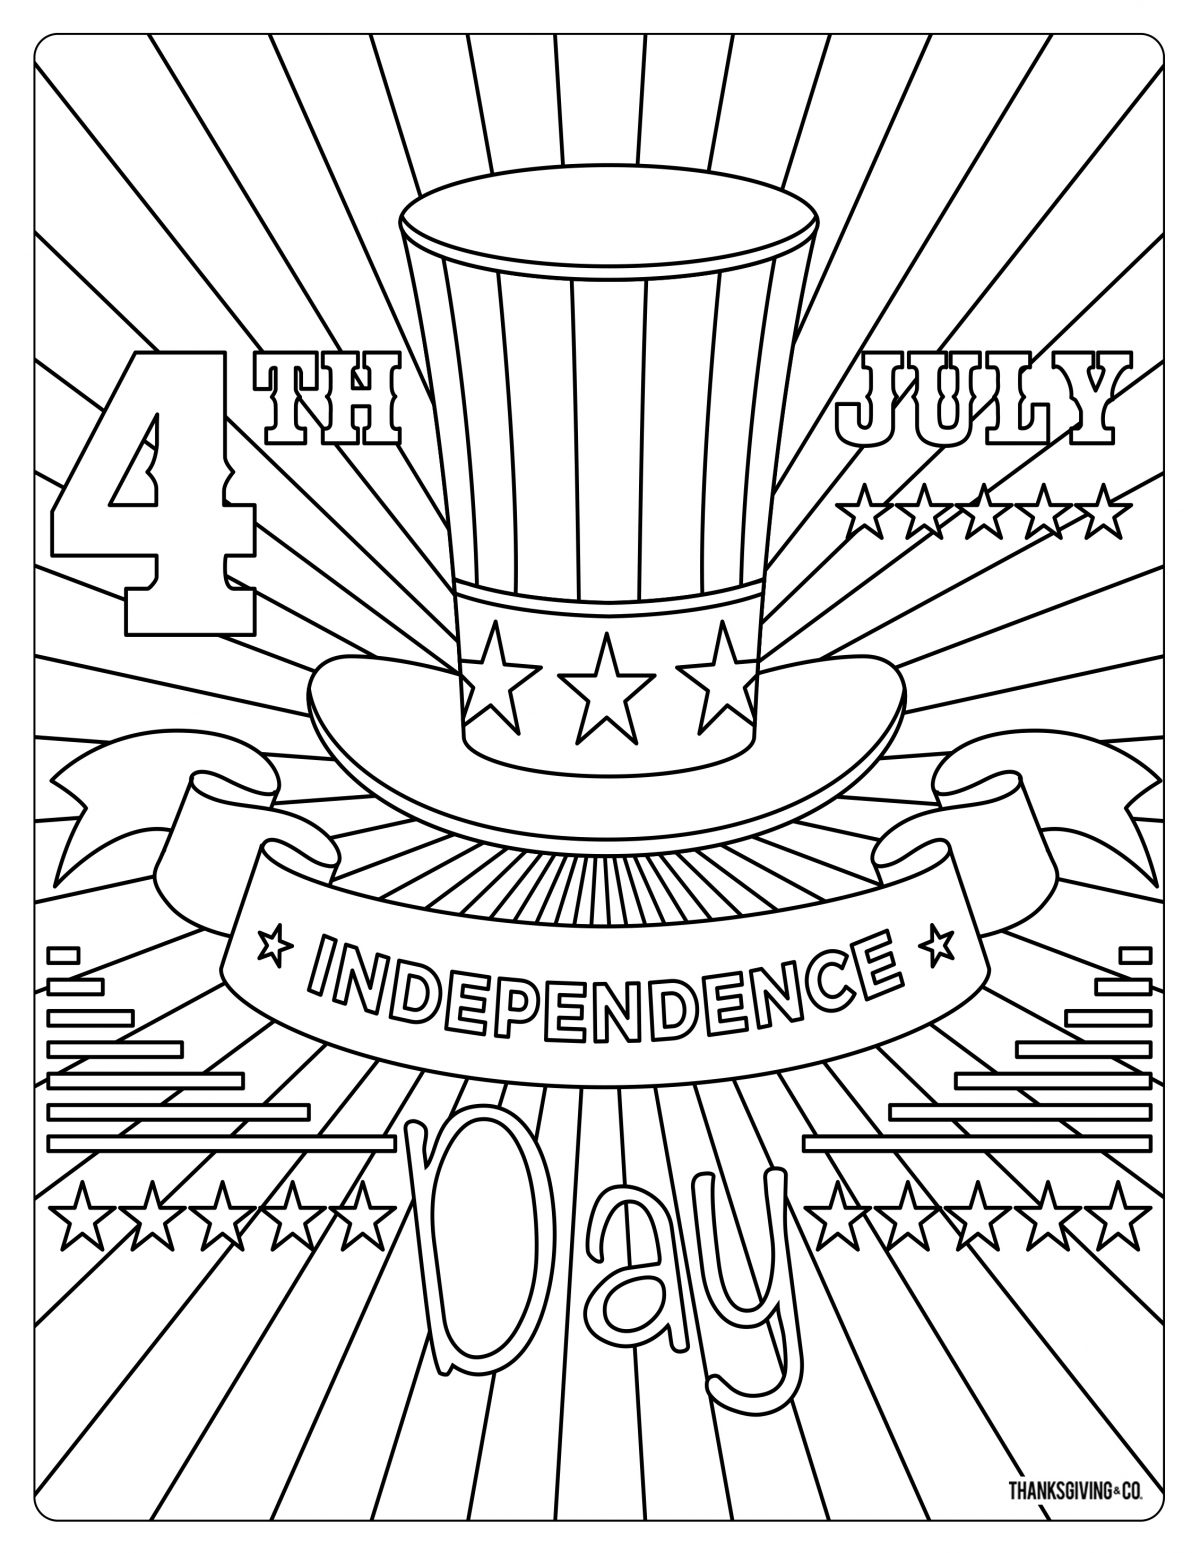 4th of July coloring page - Uncle Sam's hat on a patriotic sunburst